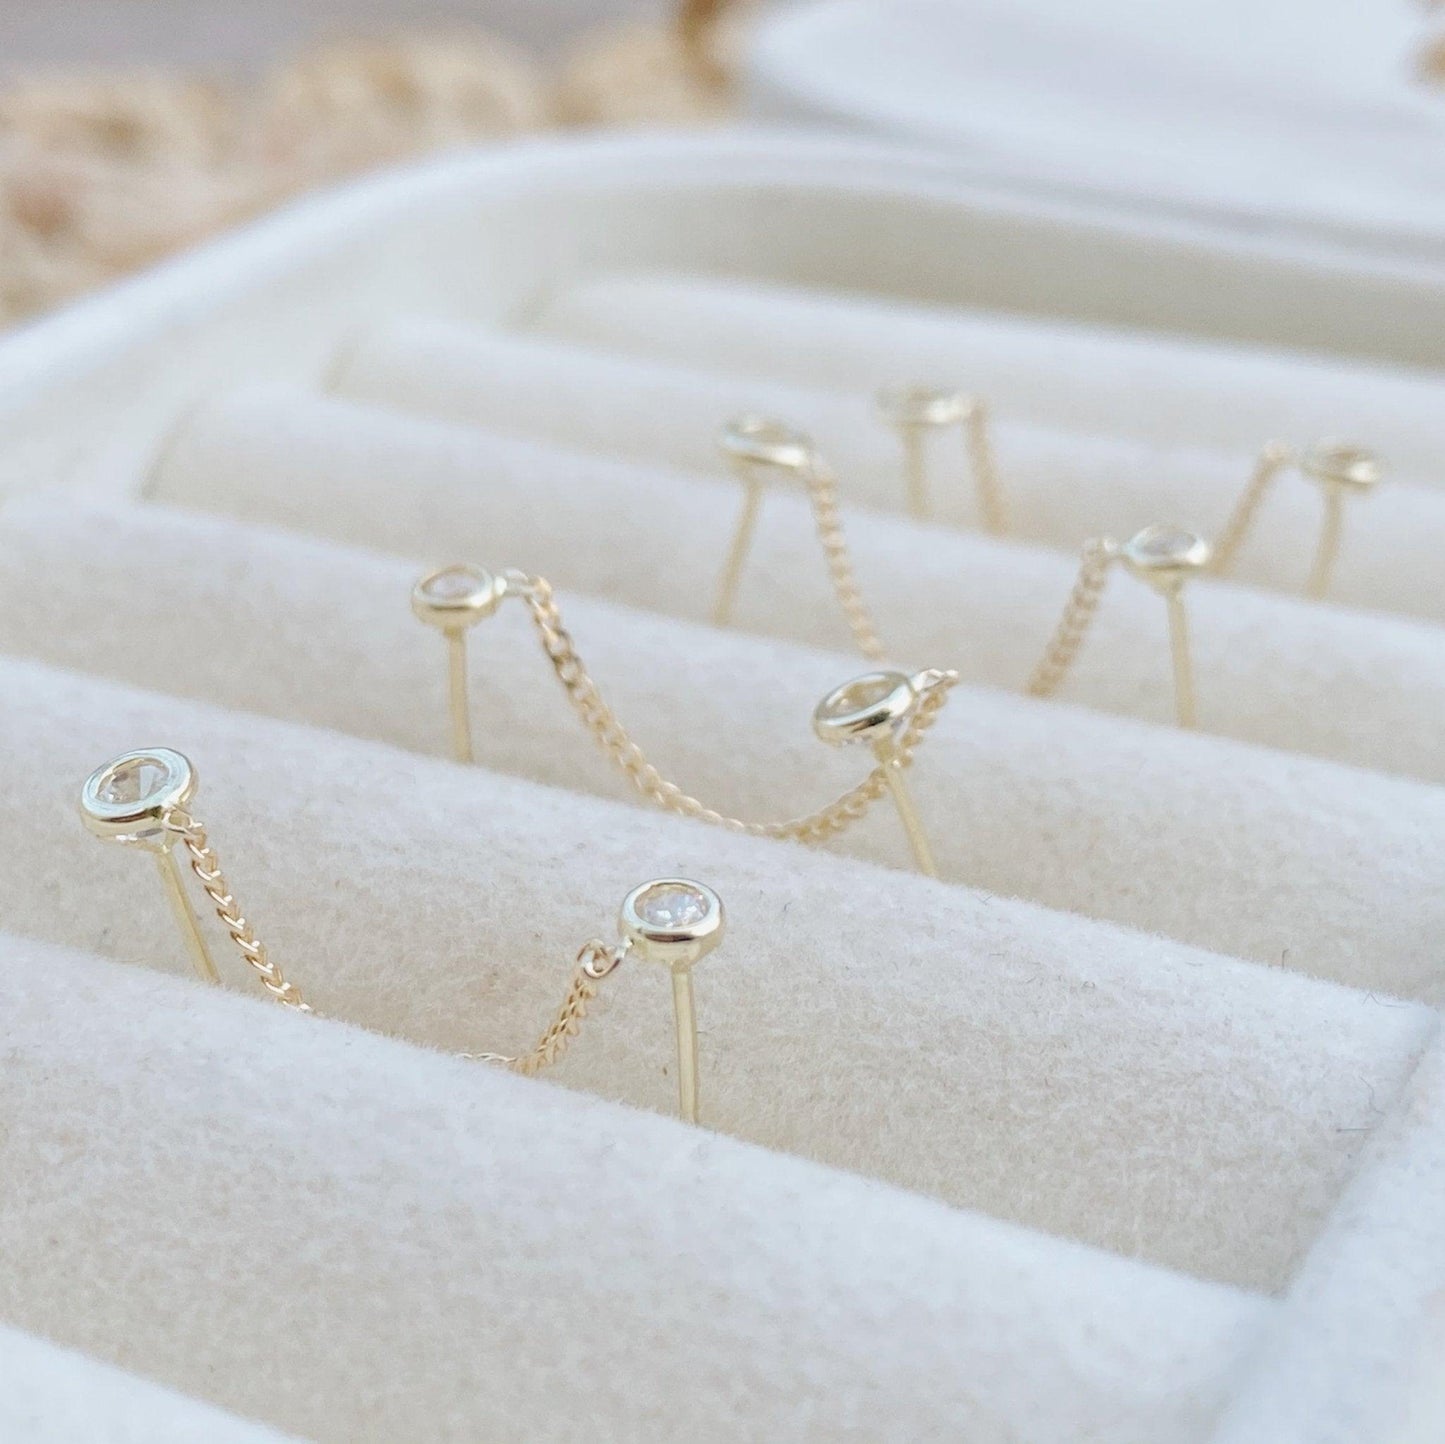 Two-hole stud earrings have a delicate design and smooth shine, adding beauty to your face. The classic two-hole double circle chain earring fits well with your face. This double ear piercing earrings features 10K gold and has a geometric style that is not only stylish but also durable.